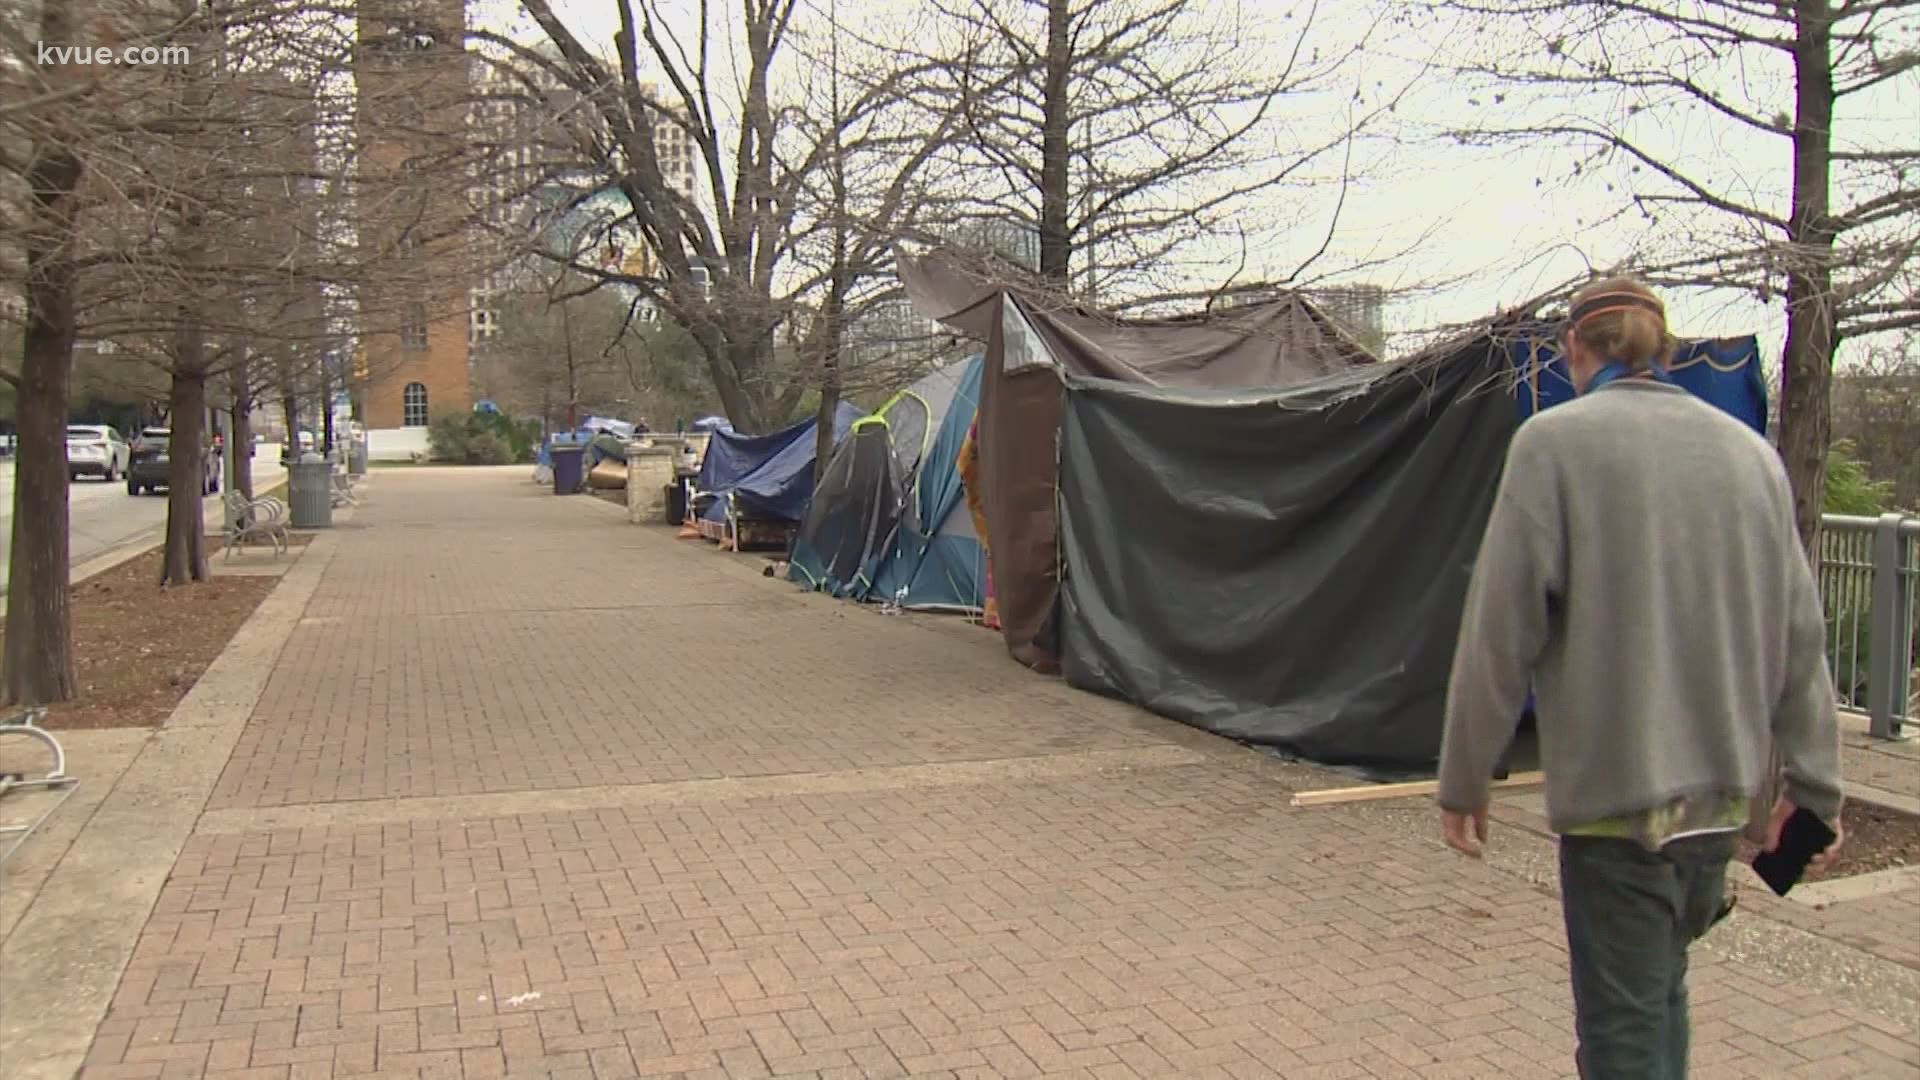 The Austin City Council is considering partially reinstating the City's camping ban, as well as possibly separating the forensic lab from the police department.